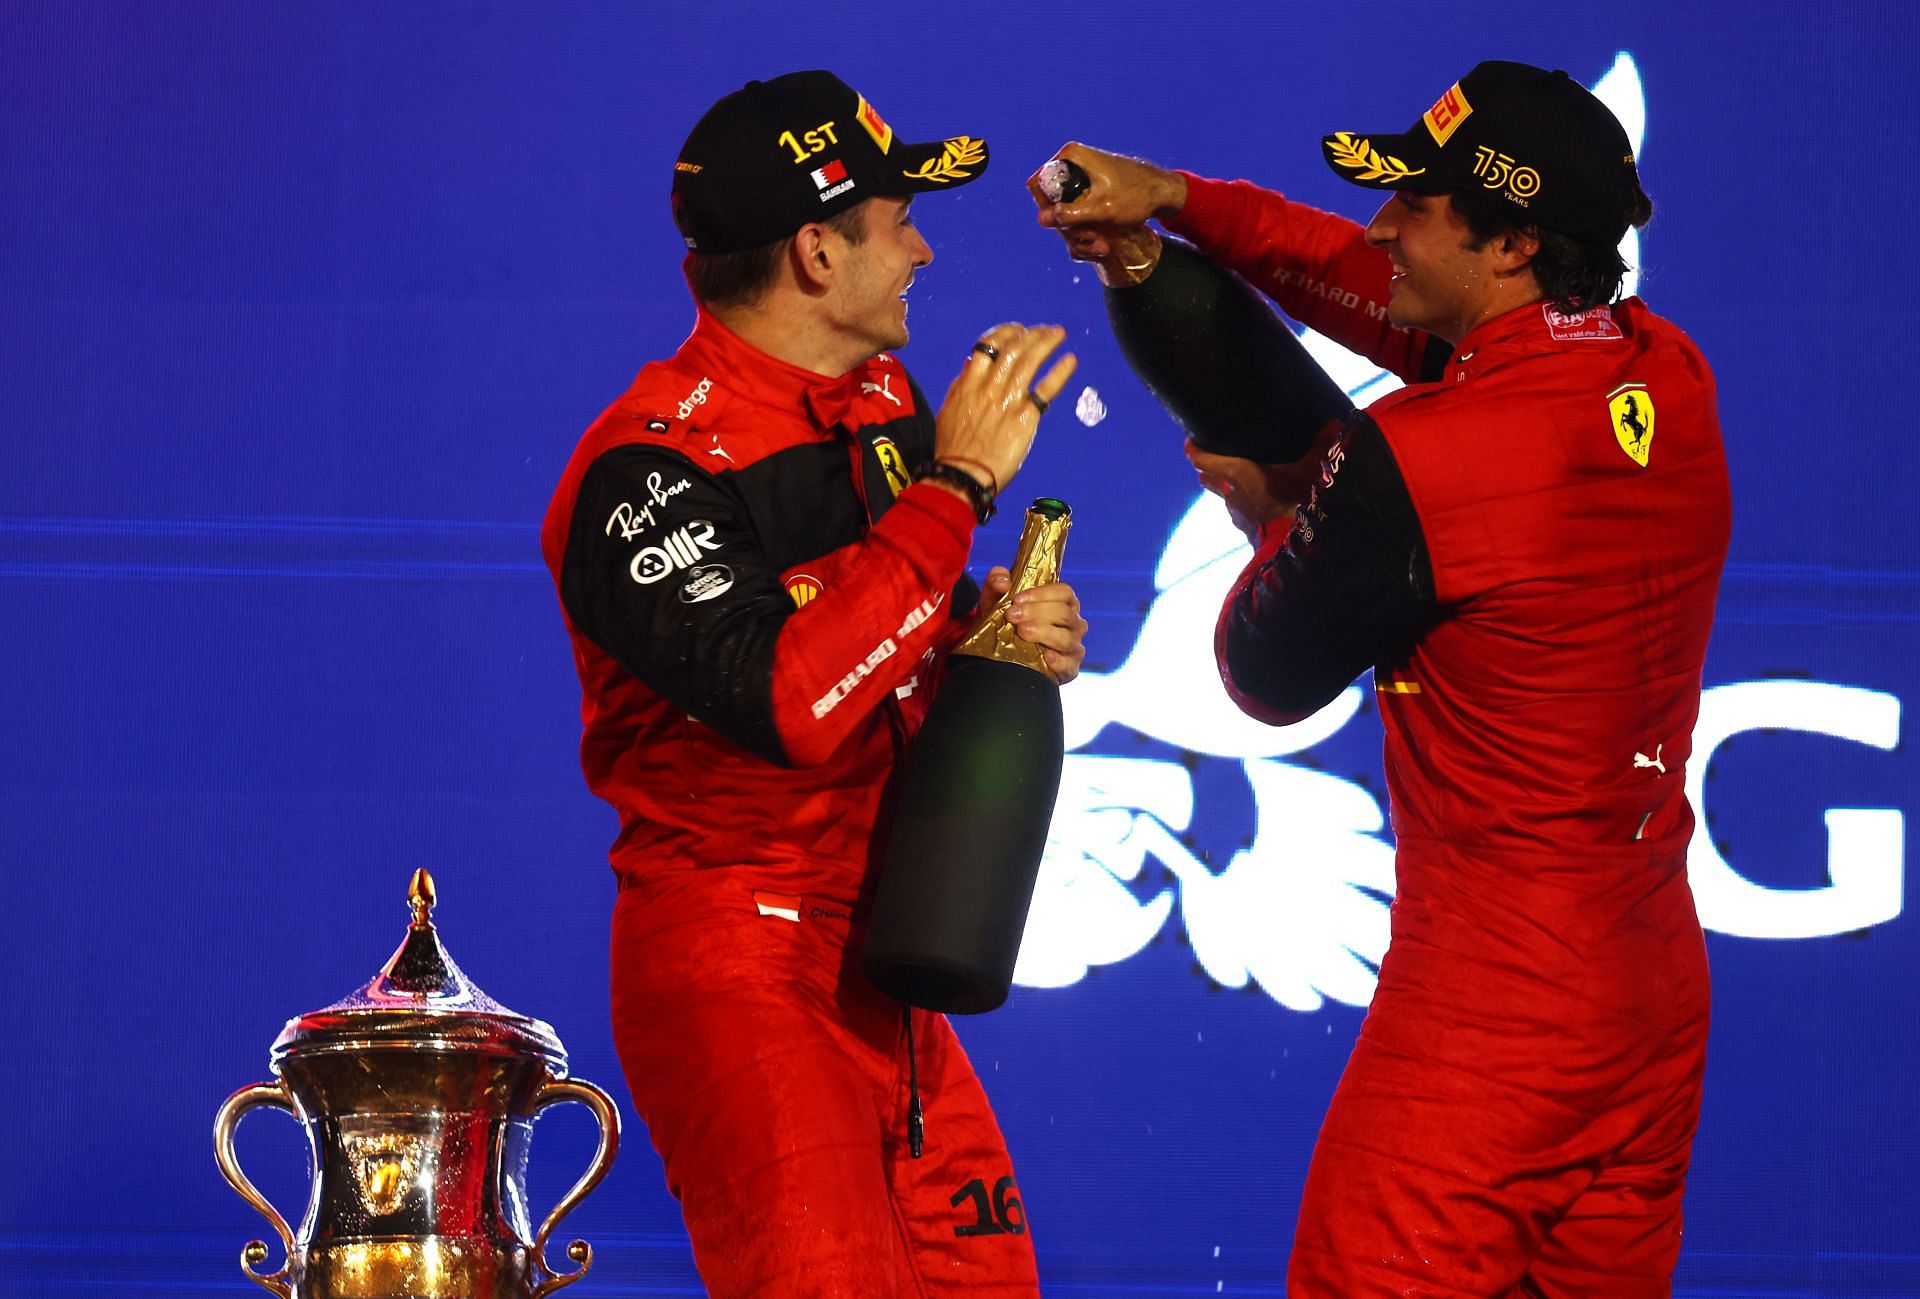 Ferrari drivers Charles Leclerc (left) and Carlos Sainz (right) celebrate on the podium of the 2022 F1 Bahrain GP (Photo by Lars Baron/Getty Images)